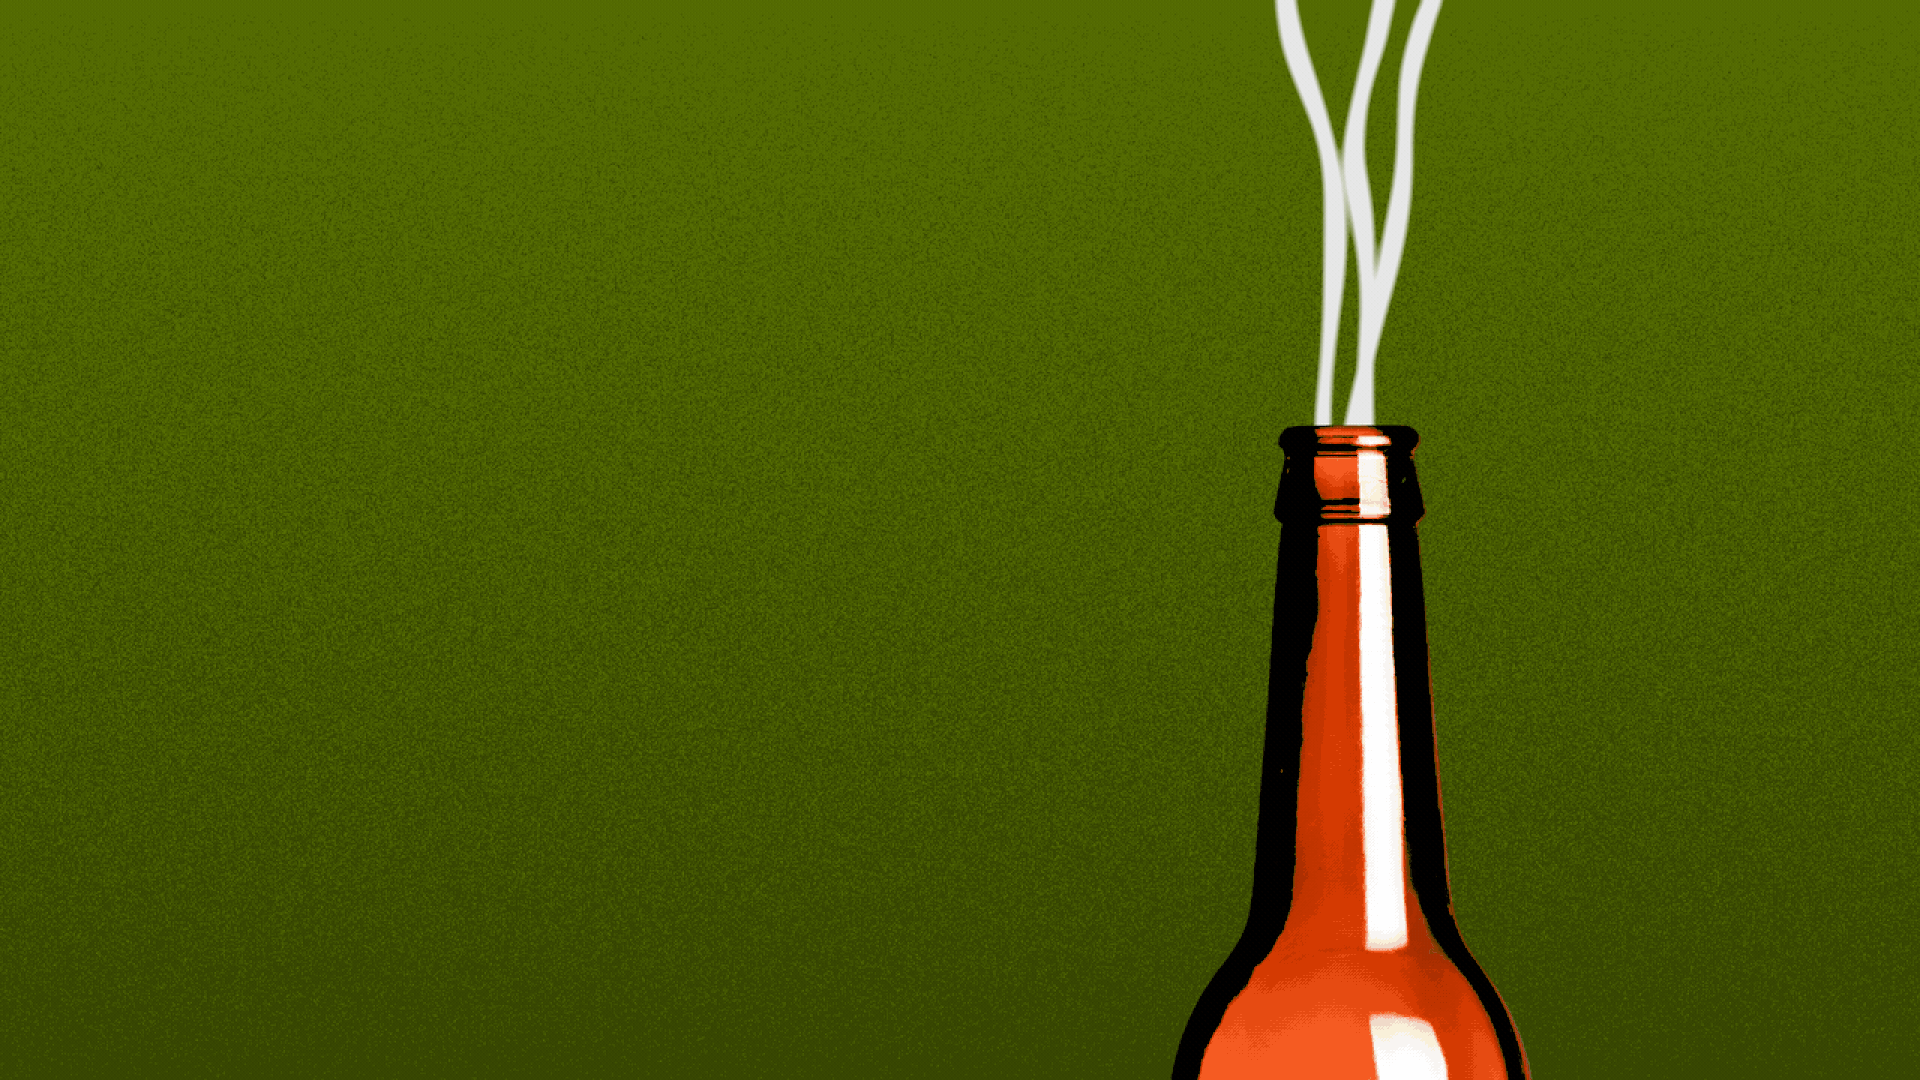 Animated illustration of a beer bottle with smoky emissions coming out of it, and a bottle cap falling onto it and stopping them.